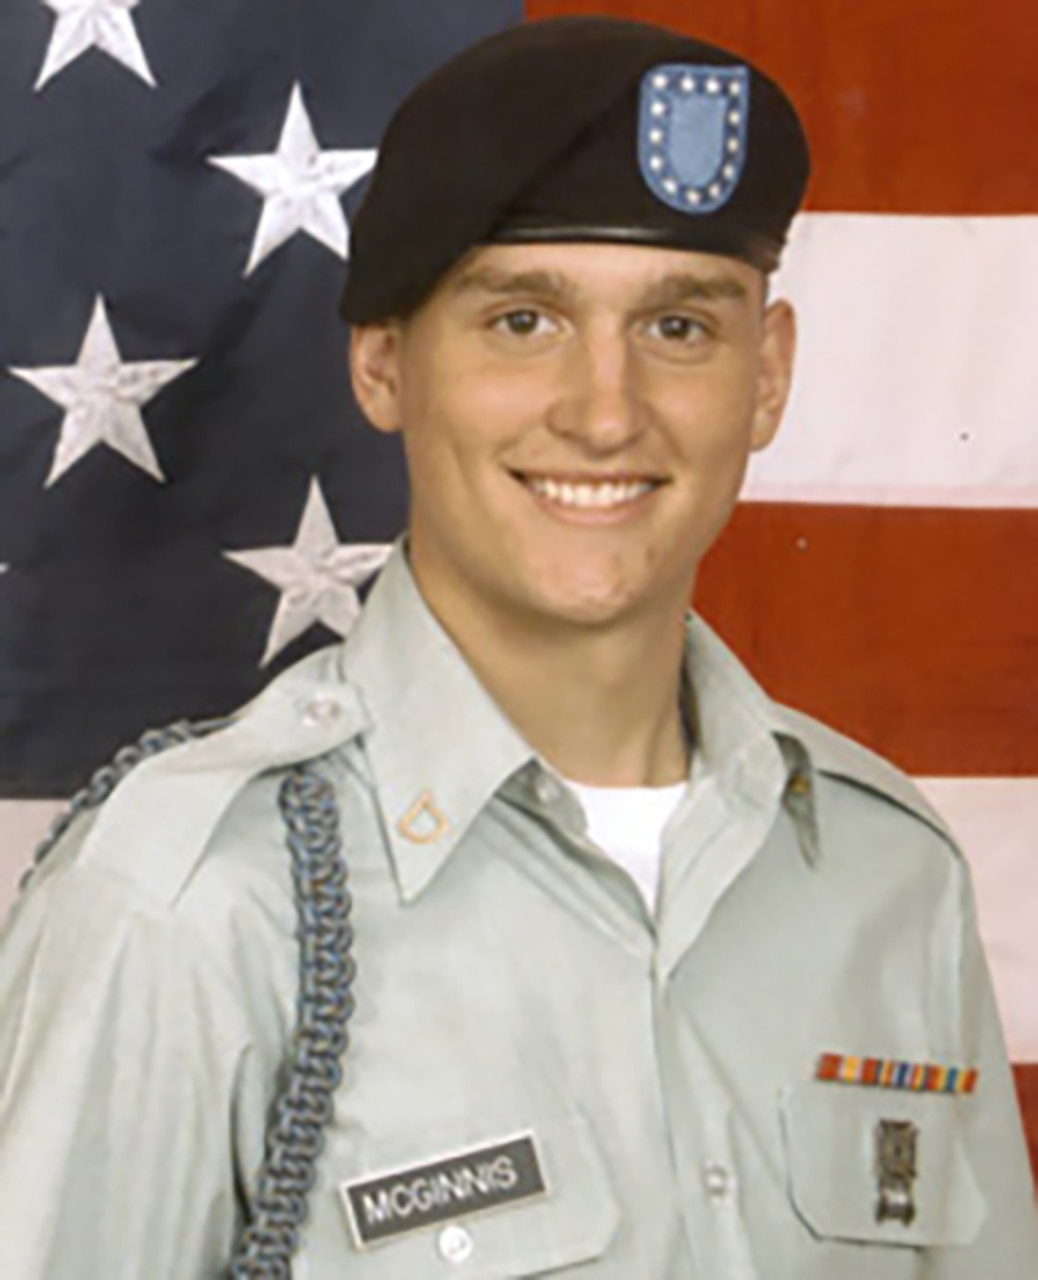 A man in uniform smiles for the camera.